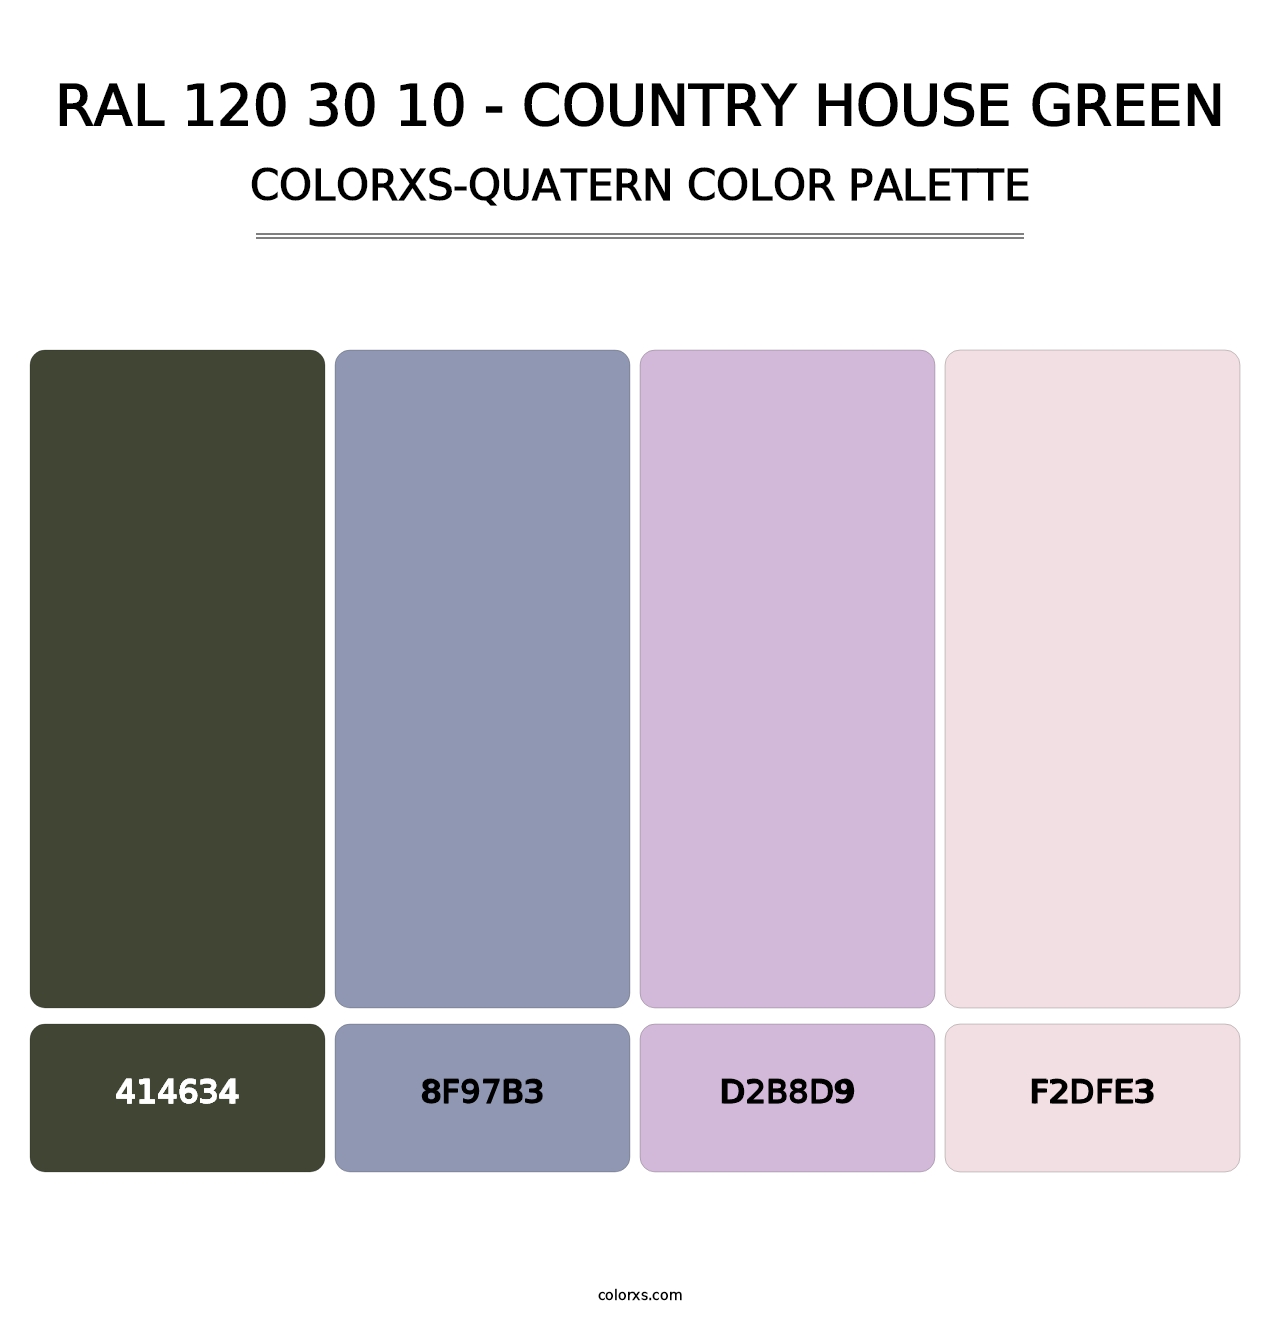 RAL 120 30 10 - Country House Green - Colorxs Quatern Palette